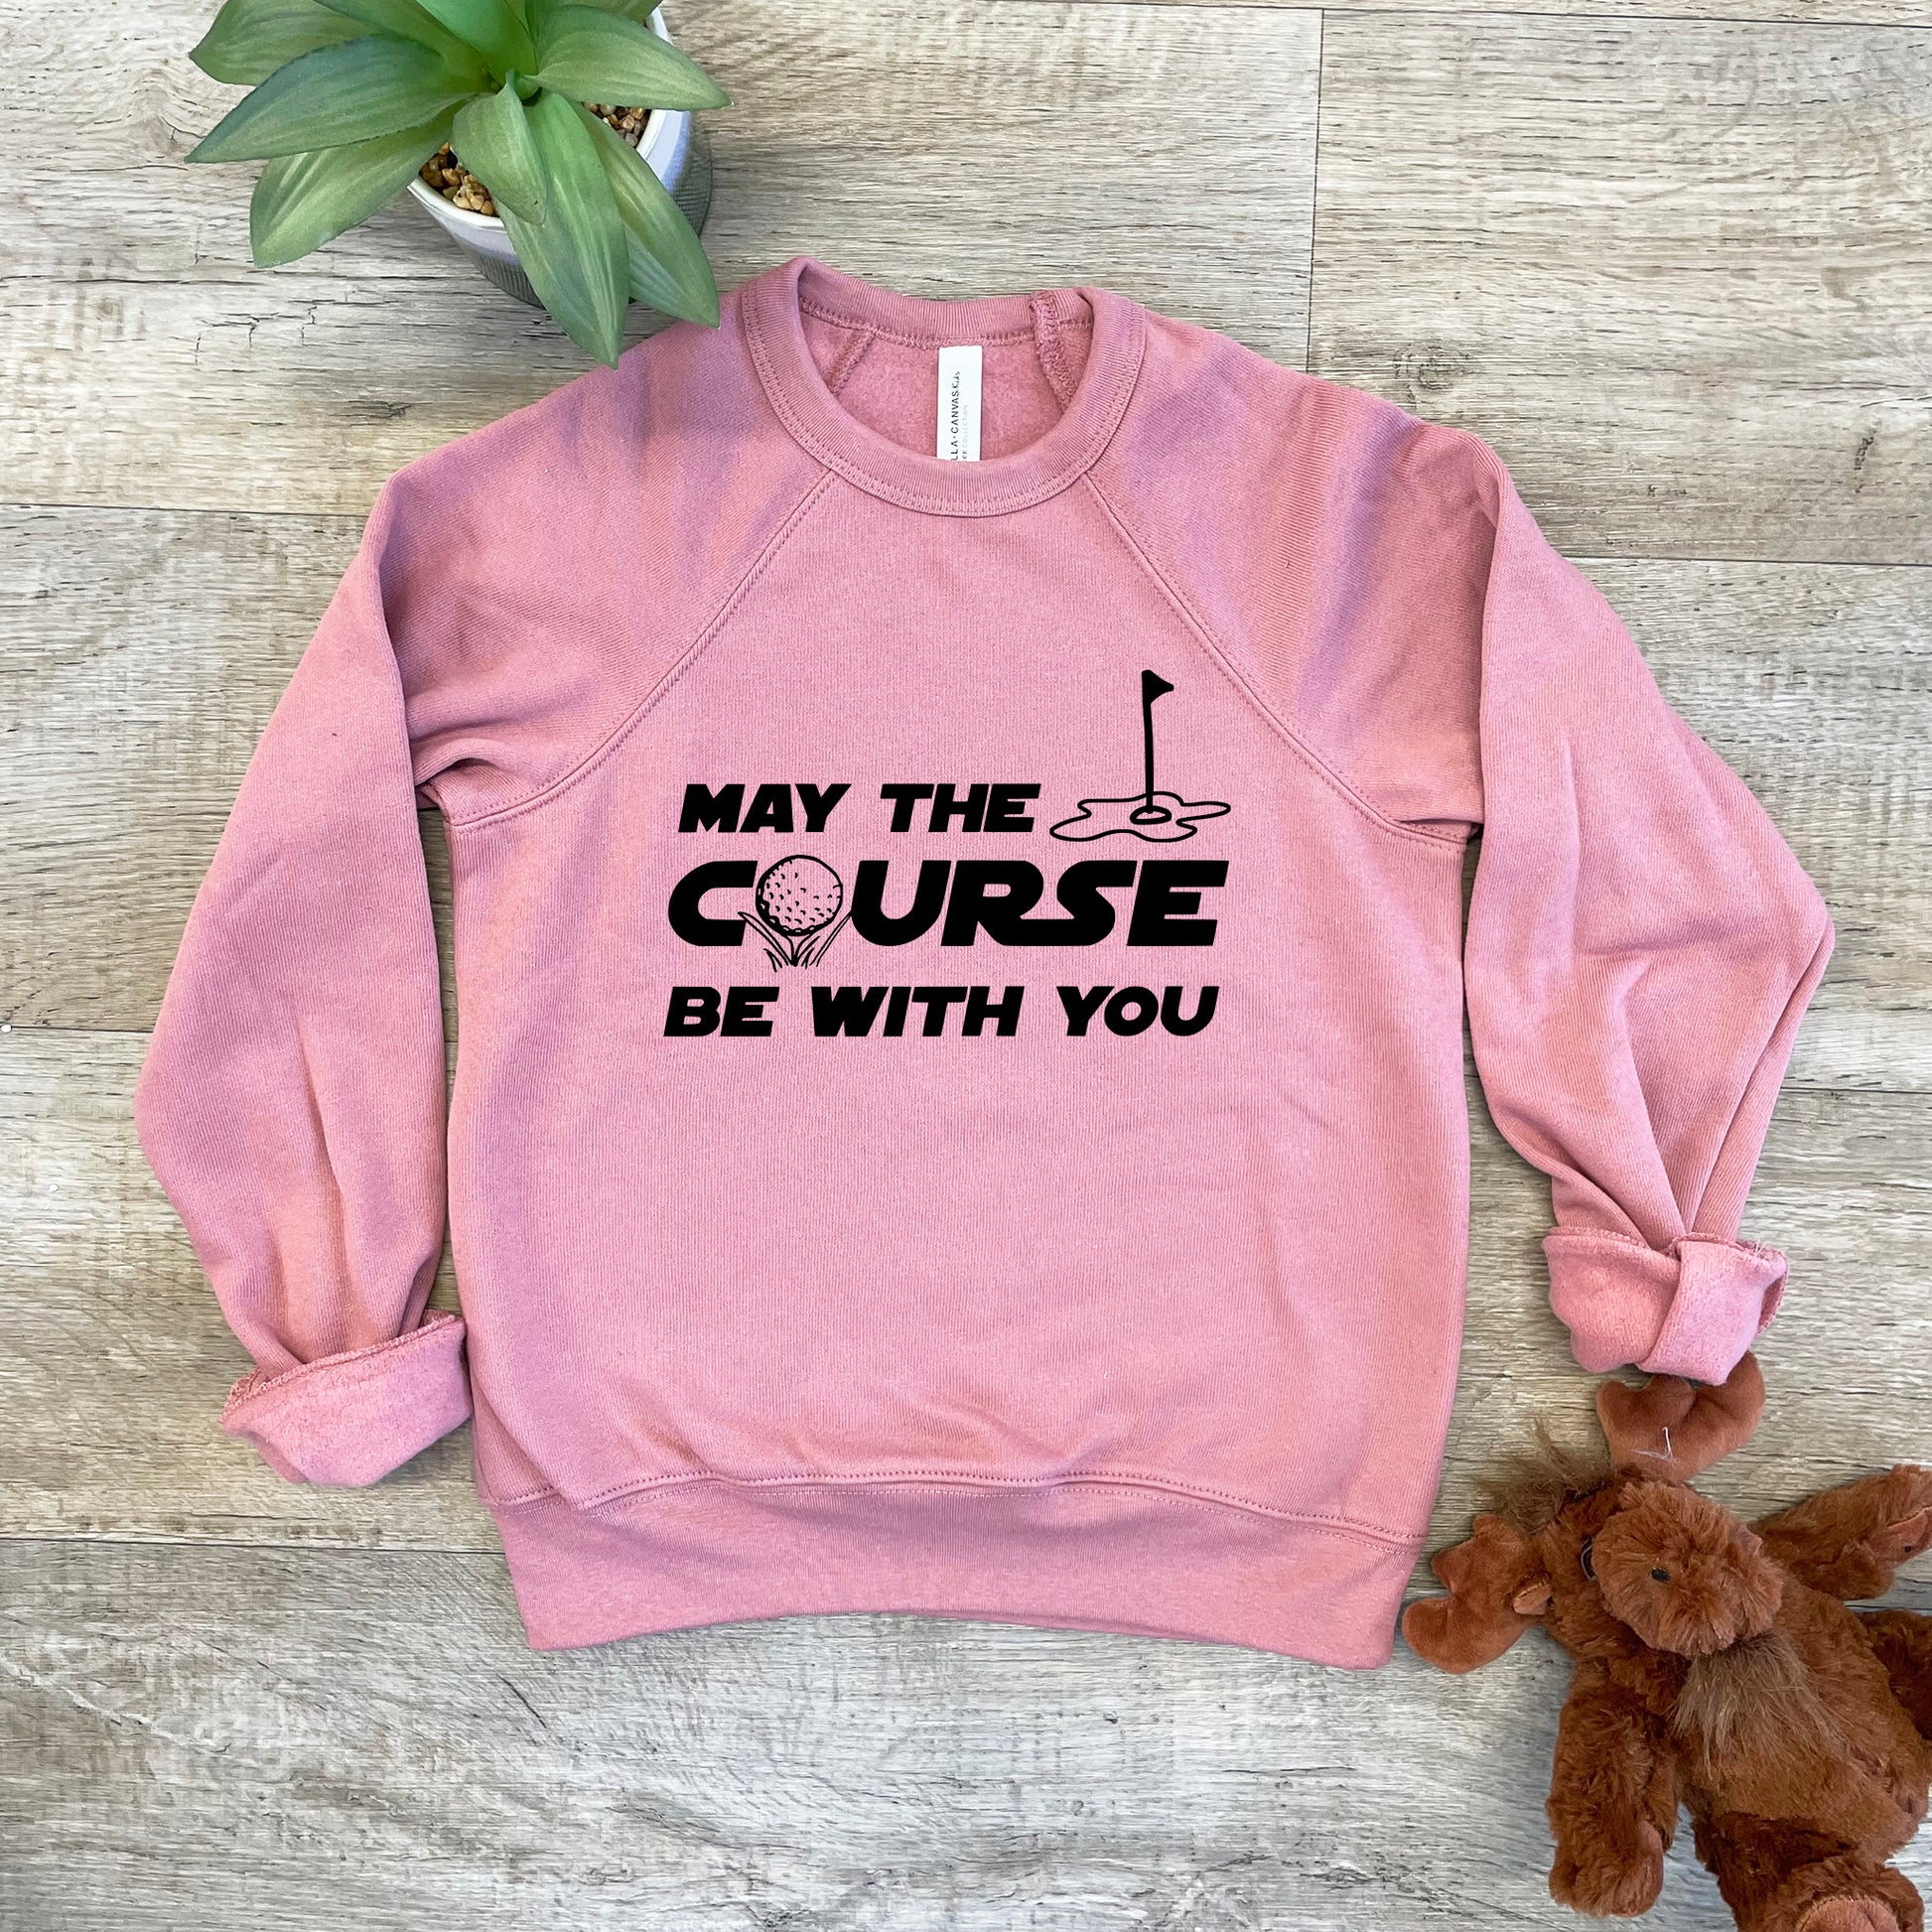 a pink sweatshirt that says may the course be with you next to a teddy bear